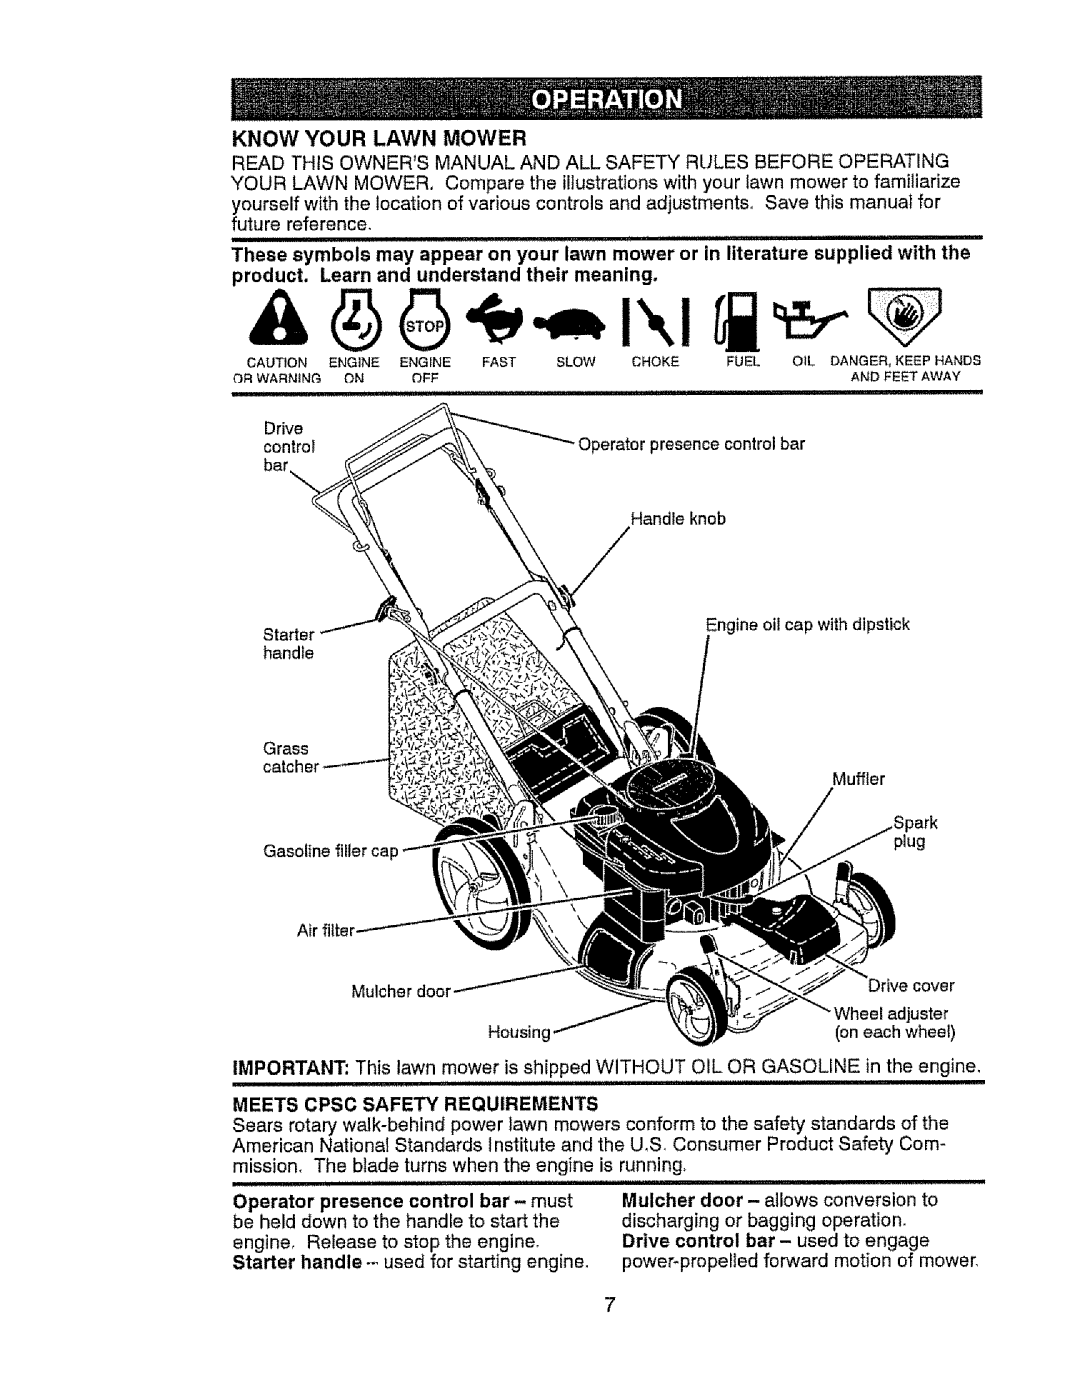 Craftsman 917.37646 owner manual Know Your Lawn Mower, product. Learn and understand their meaning, Mulcher, Housin 